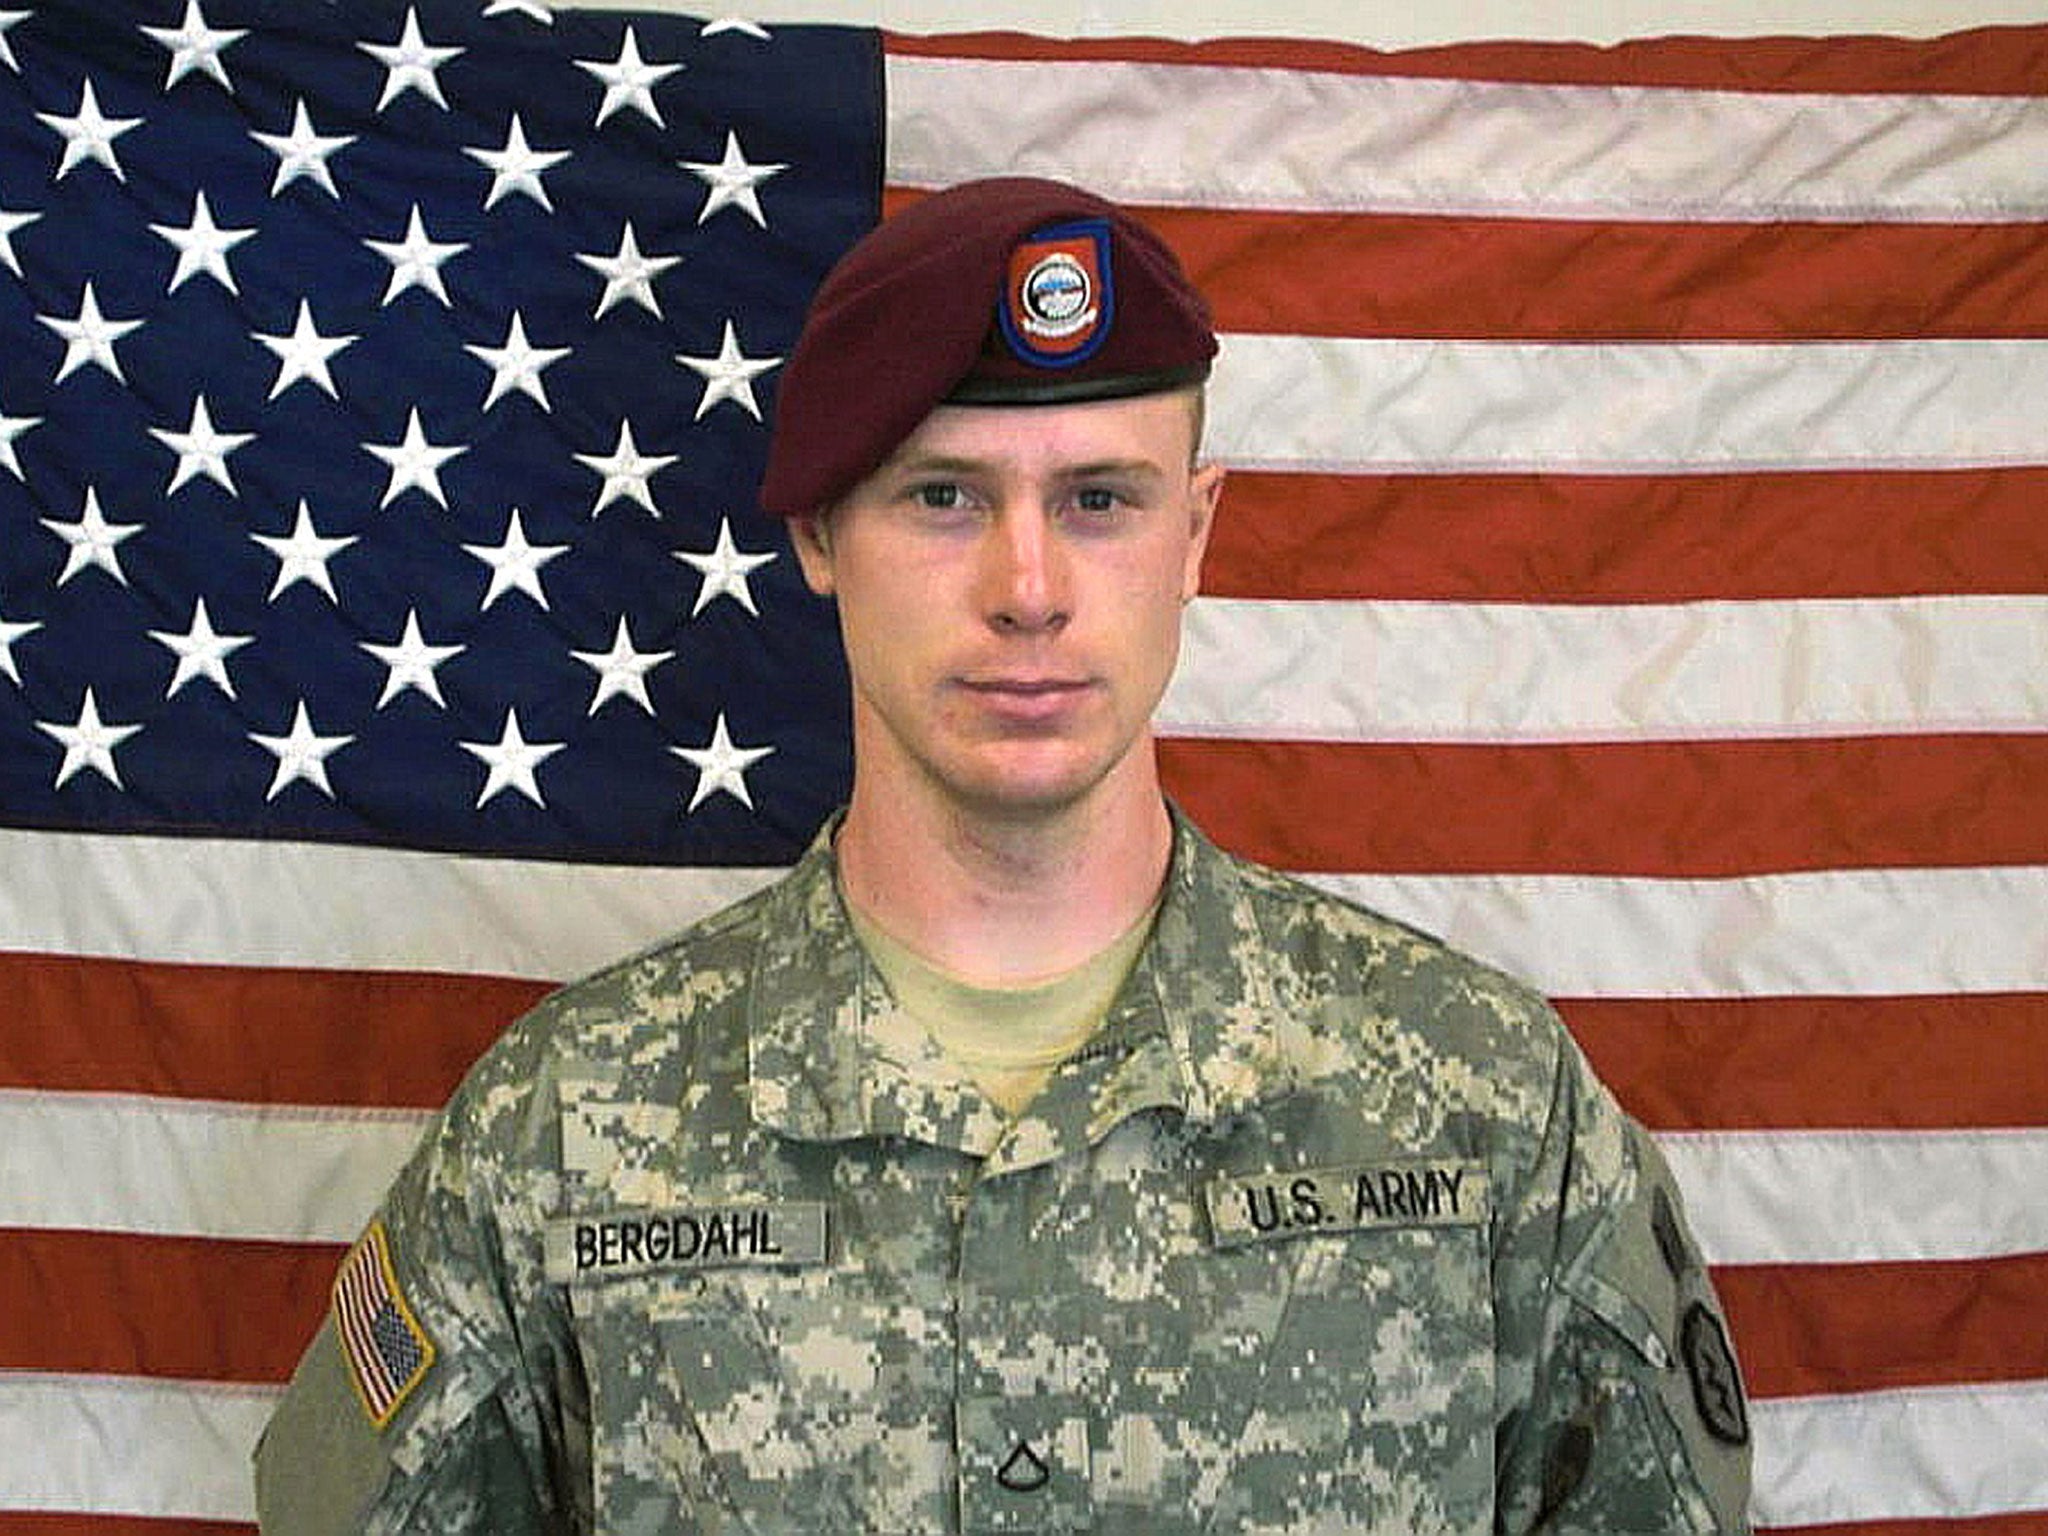 Bowe Bergdahl was freed in 2014